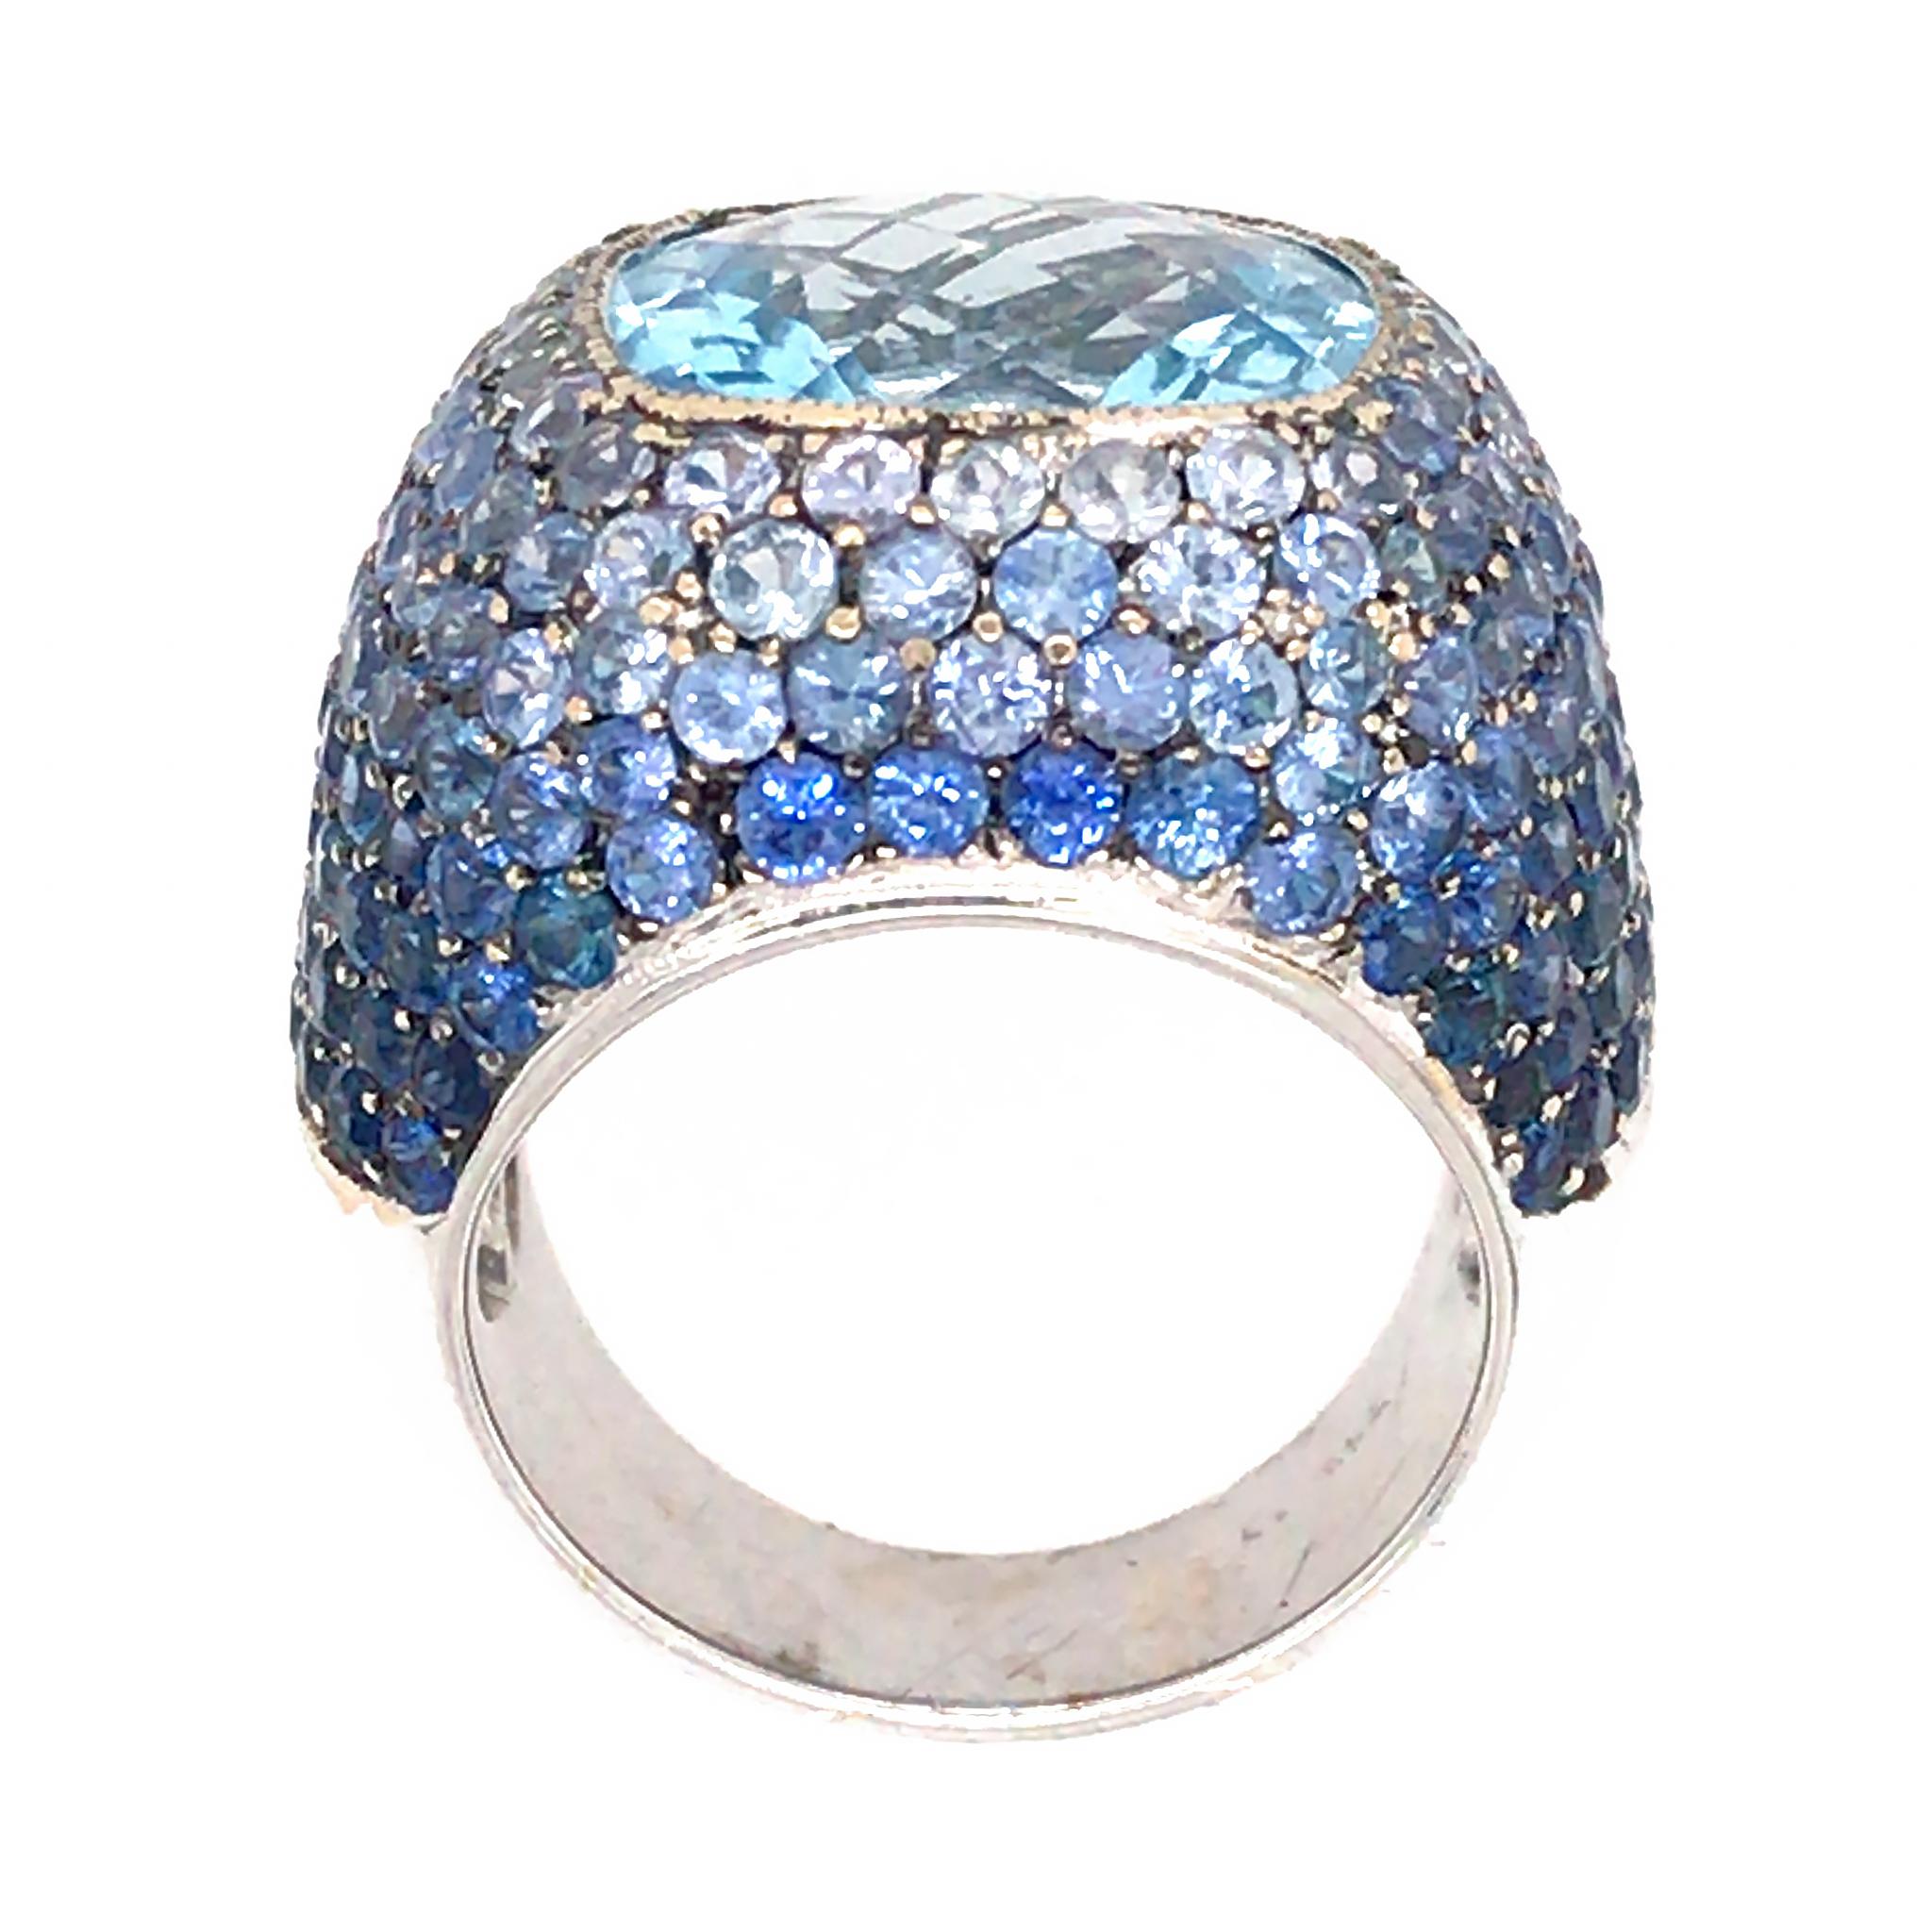 18k White Gold
Topaz: 11.47 tcw
Sapphire: 10.27 tcw
Ring Size: 6.5
Total Weight: 20 grams